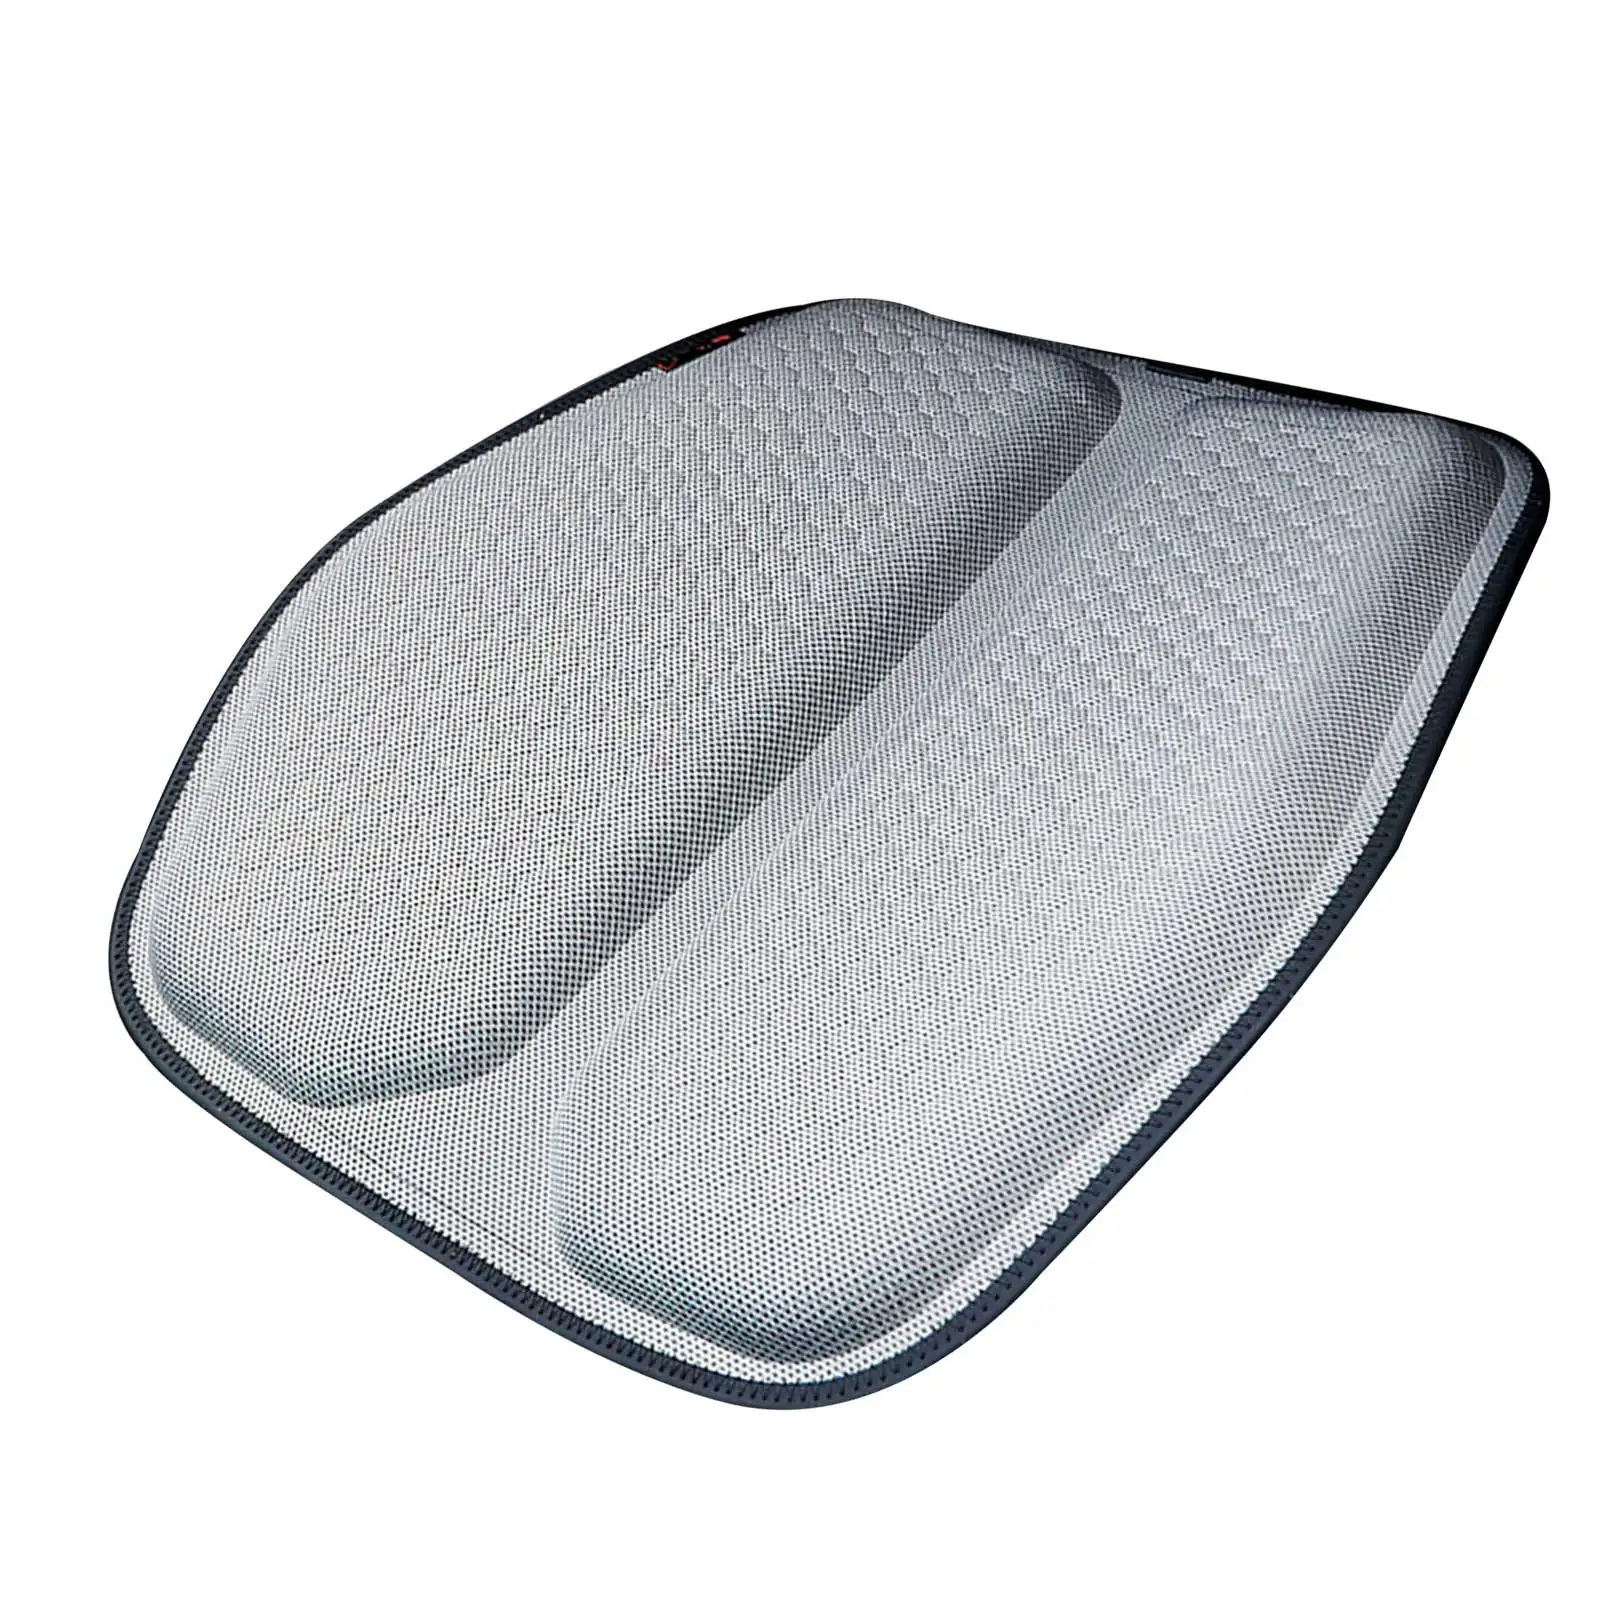 

Gel Seat Cushion Breathable Gel Cushion Ergonomic Design Relieving Pressure Durable Non-Slip Pads For Car Seat Office Chair